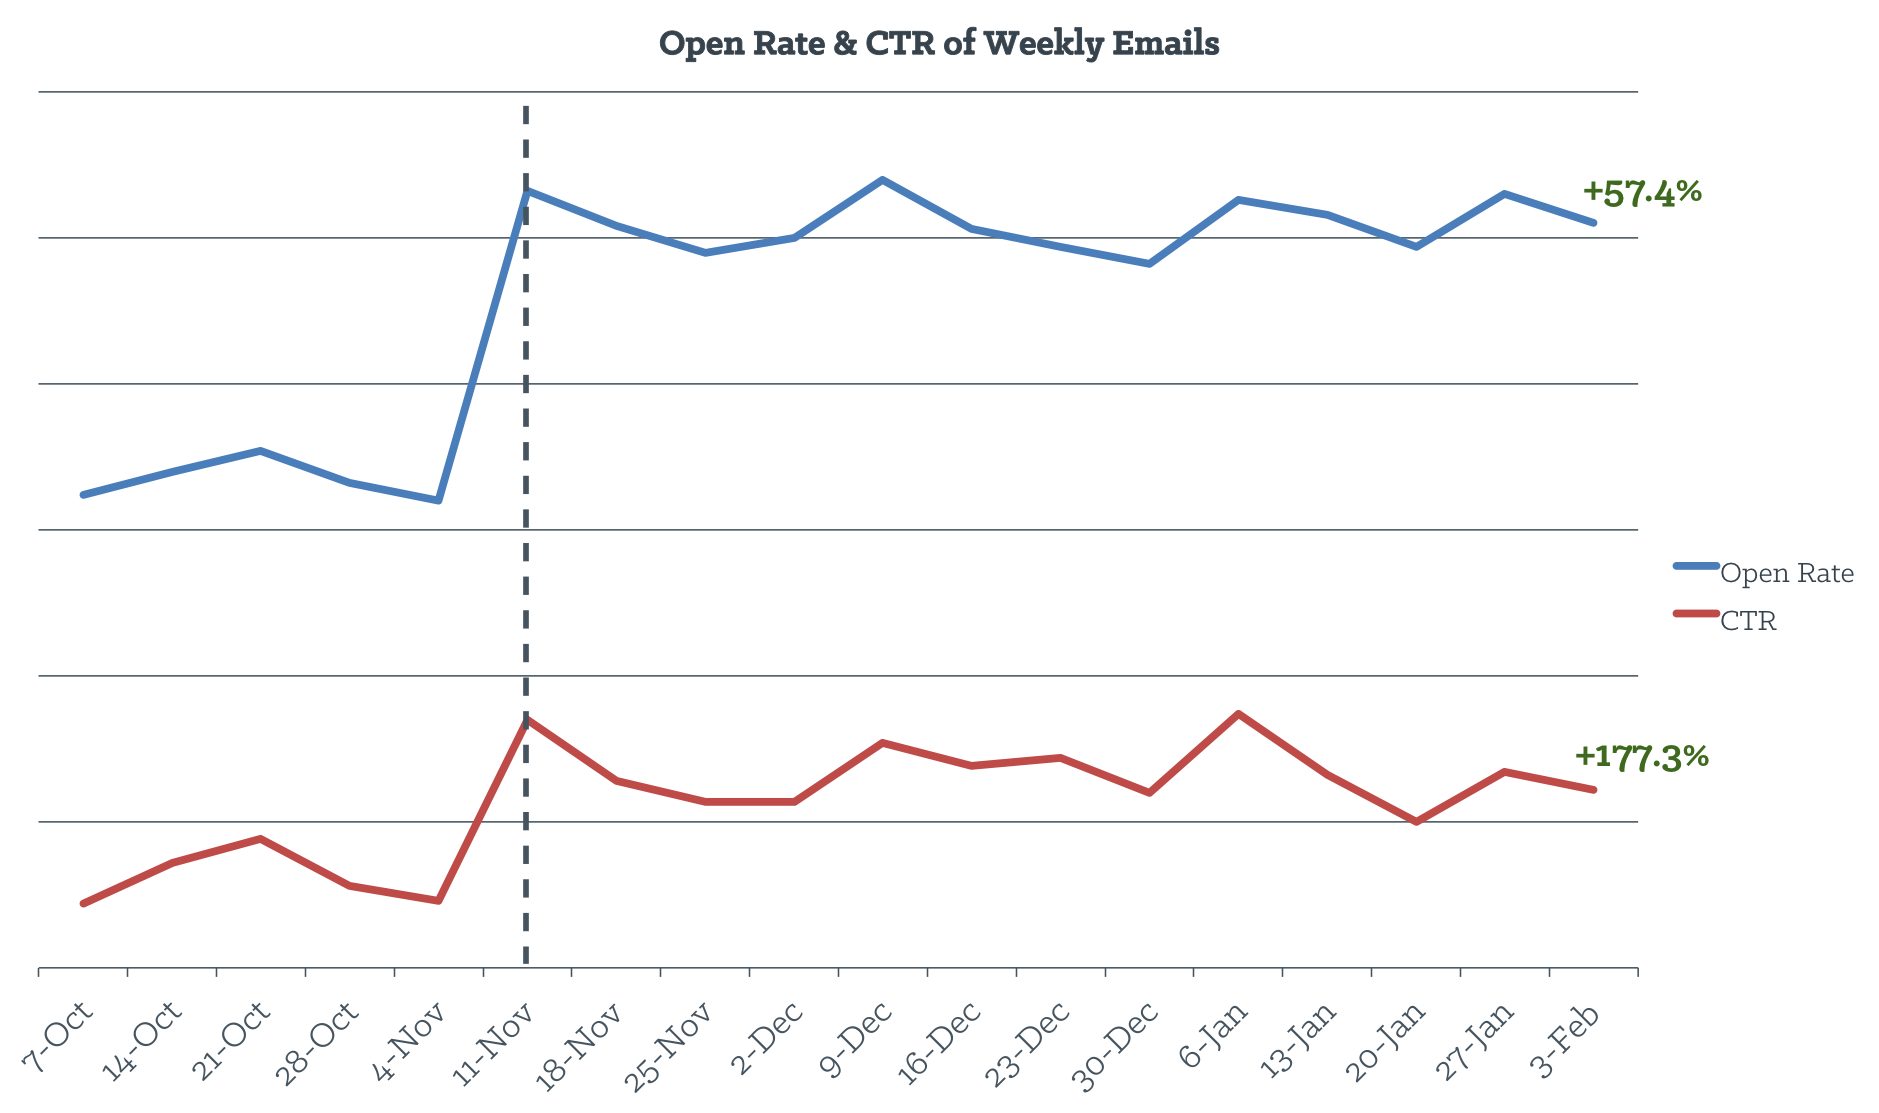 open_rate_and_ctr_of_weekly_emails-1.png